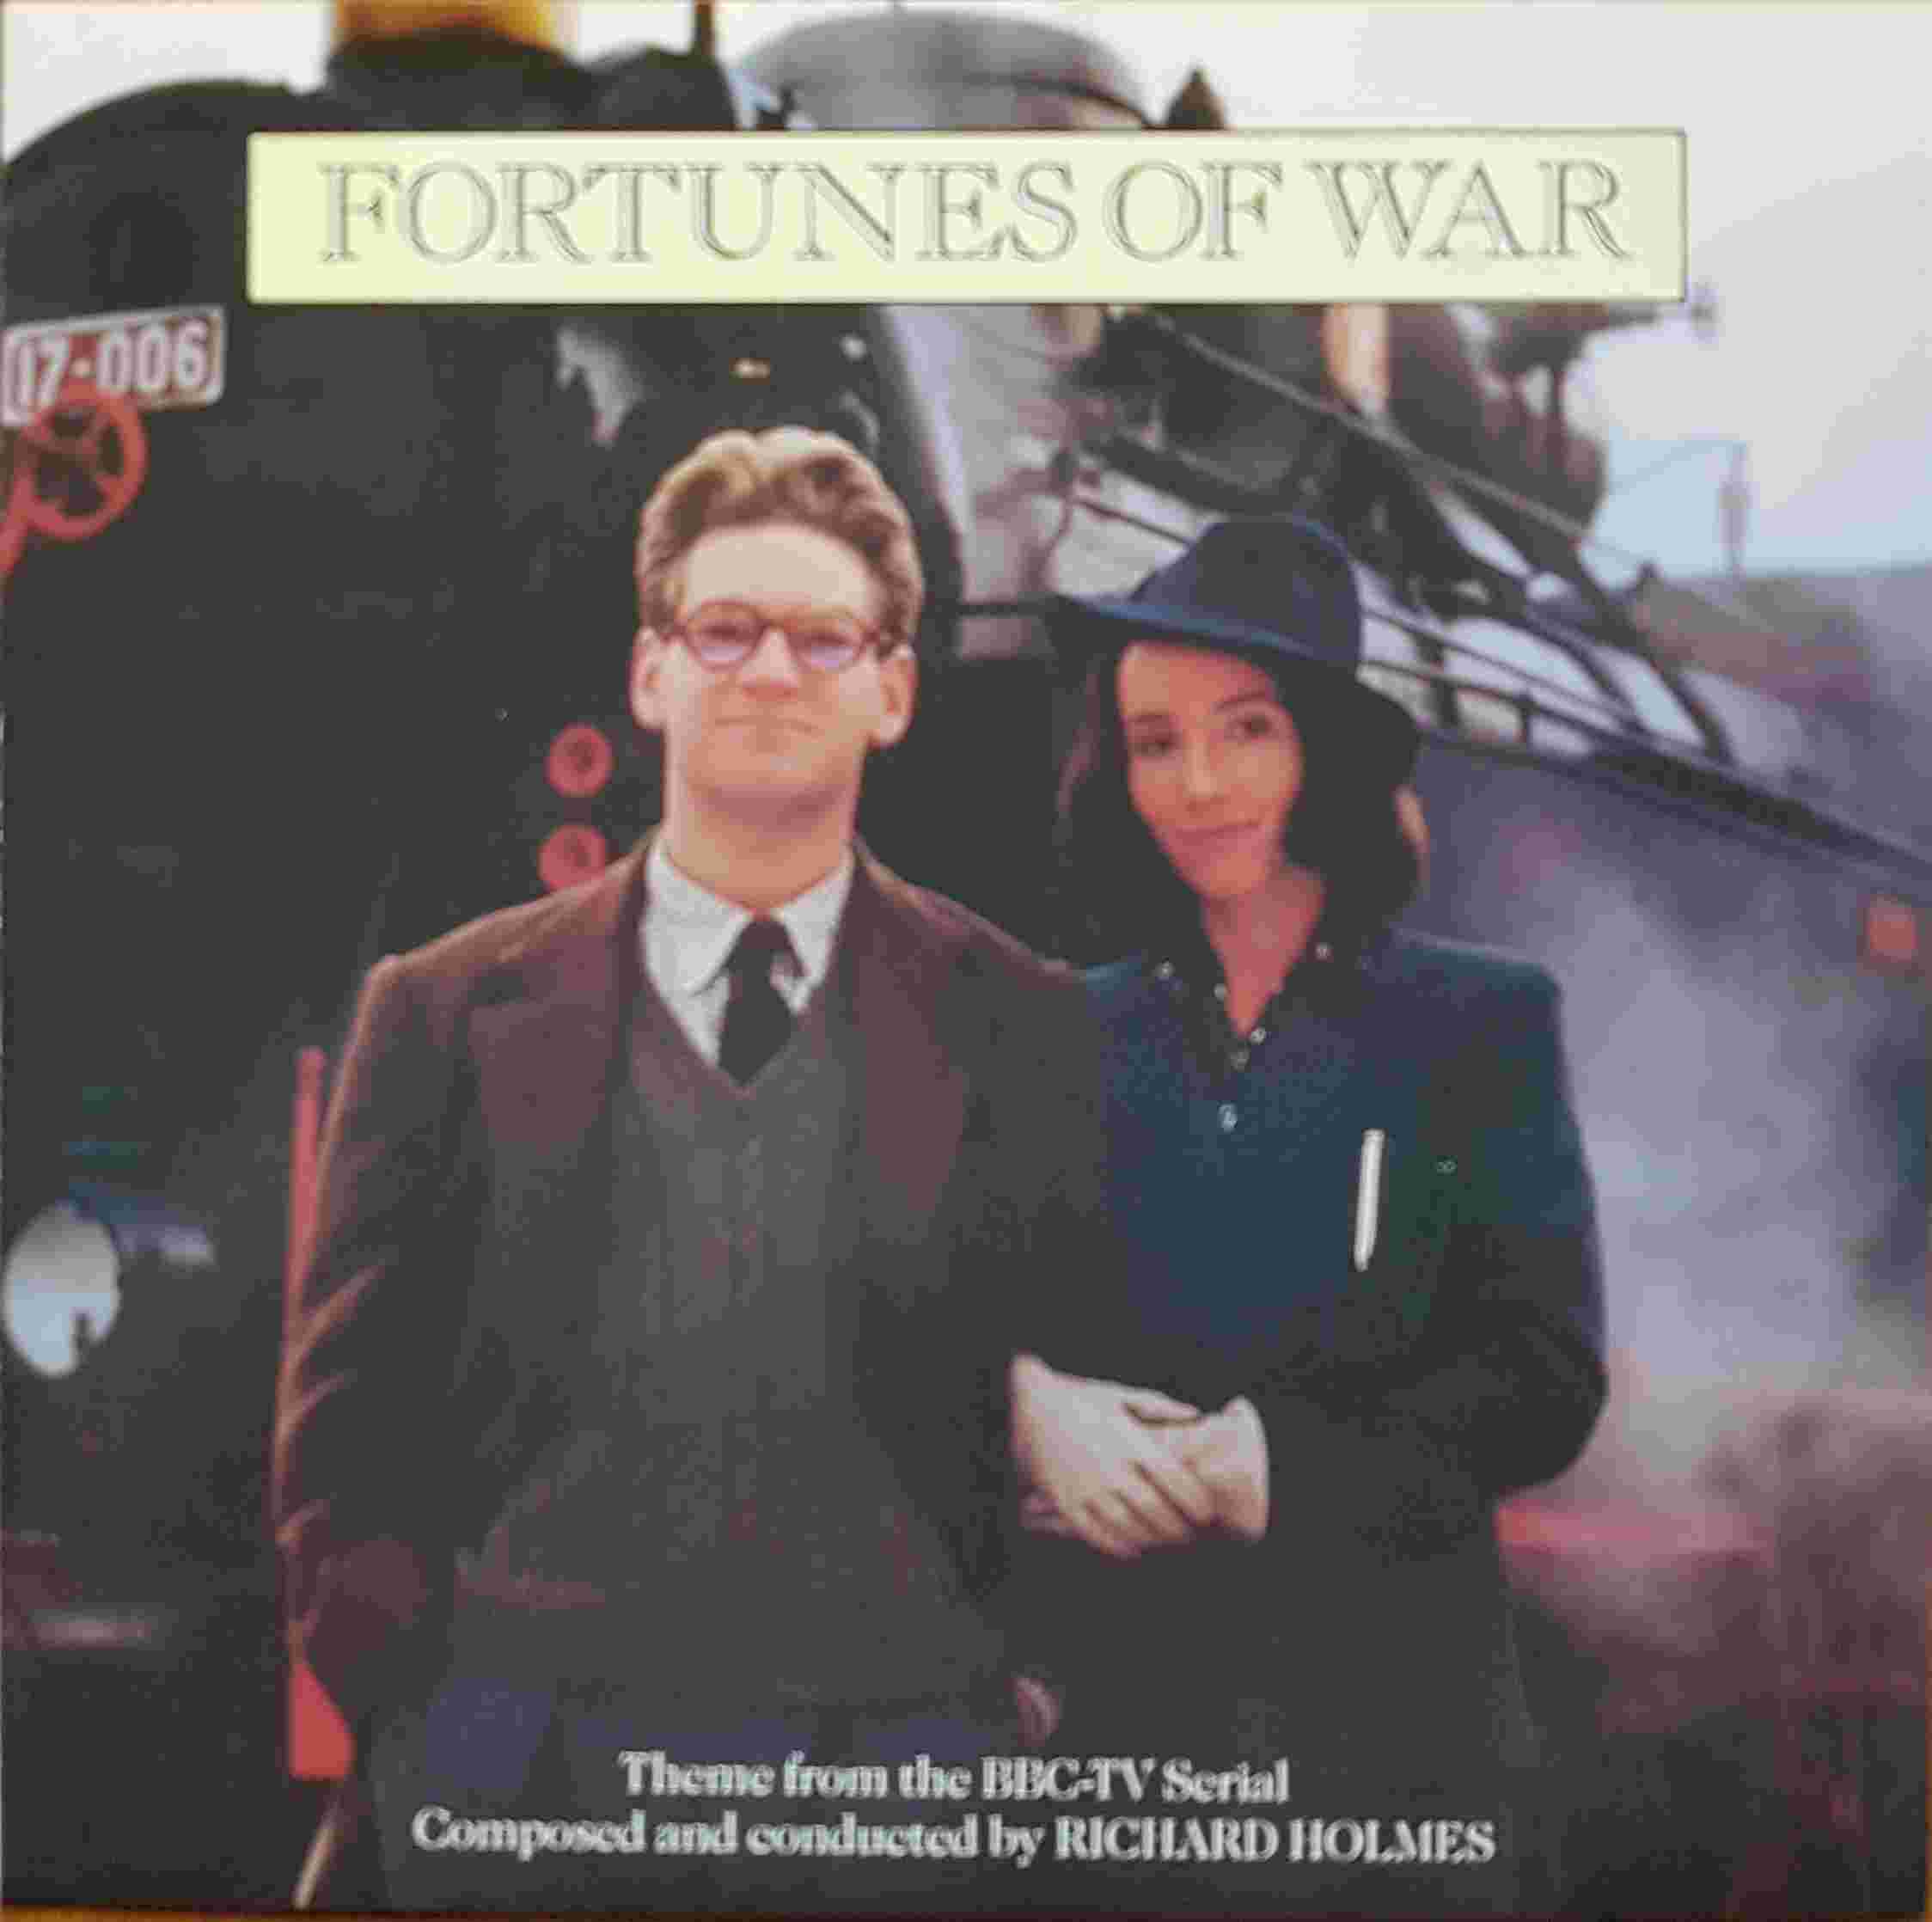 Picture of 12 RSL 221 Fortunes of war by artist Richard Holmes from the BBC 12inches - Records and Tapes library